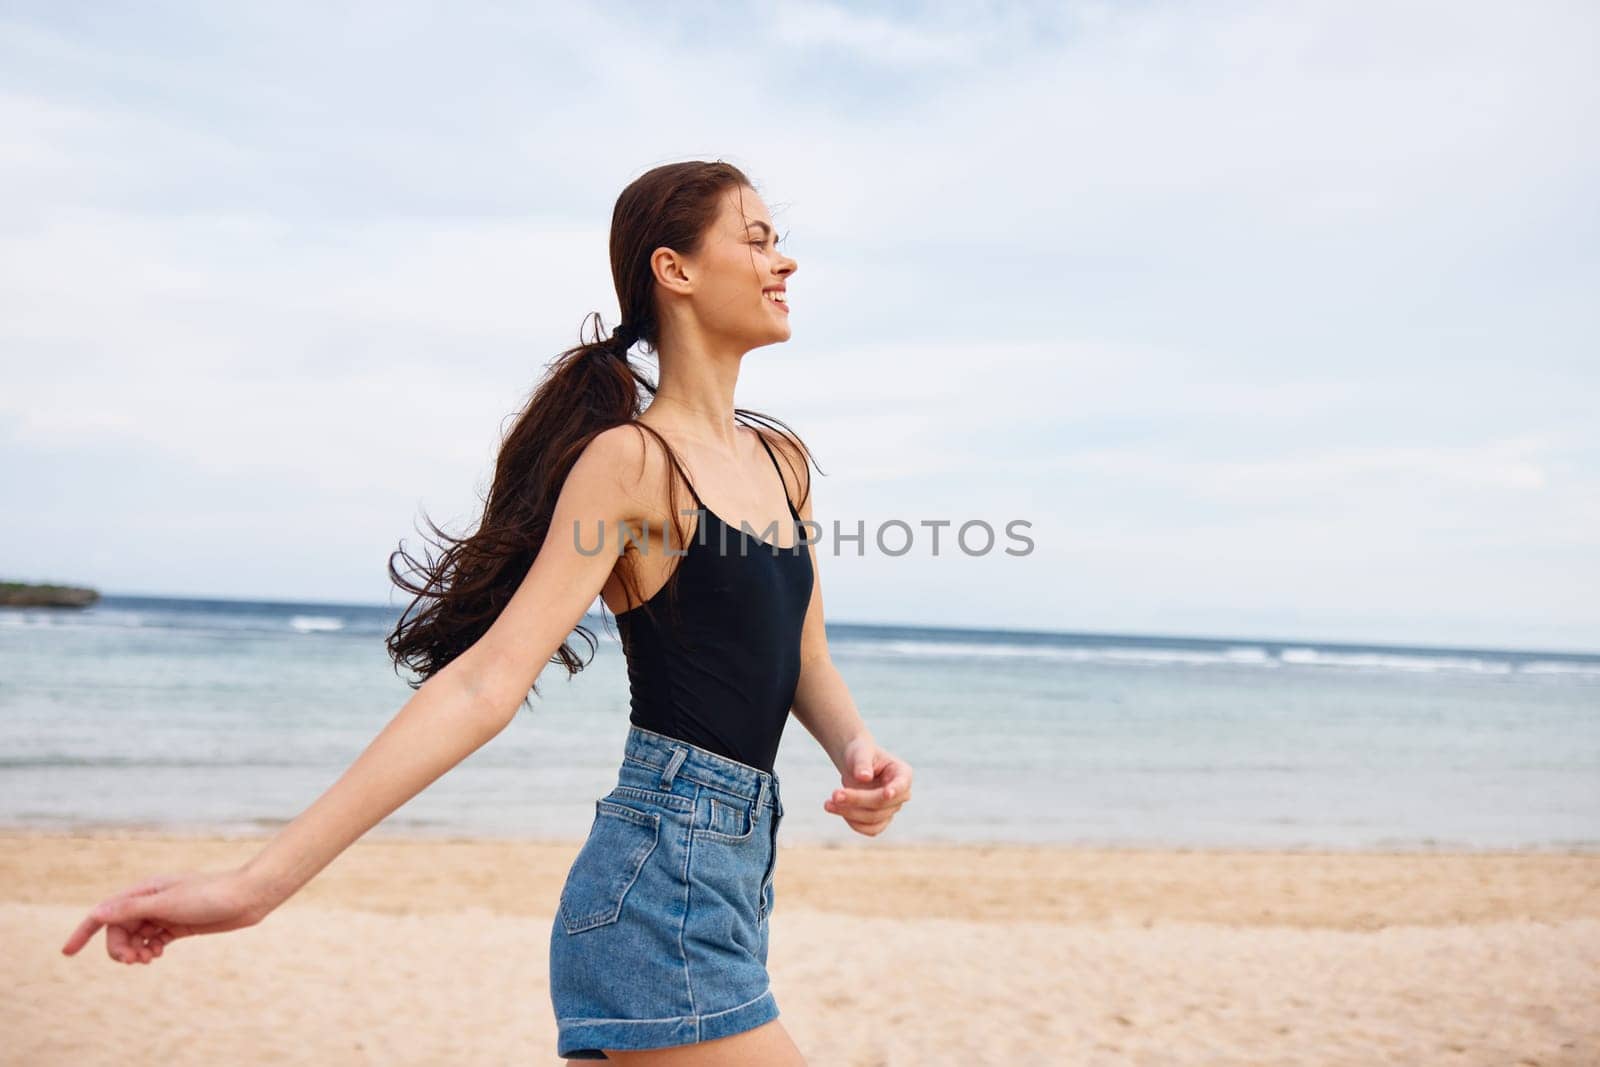 sun woman young summer sea travel beach lifestyle sunset running smile by SHOTPRIME